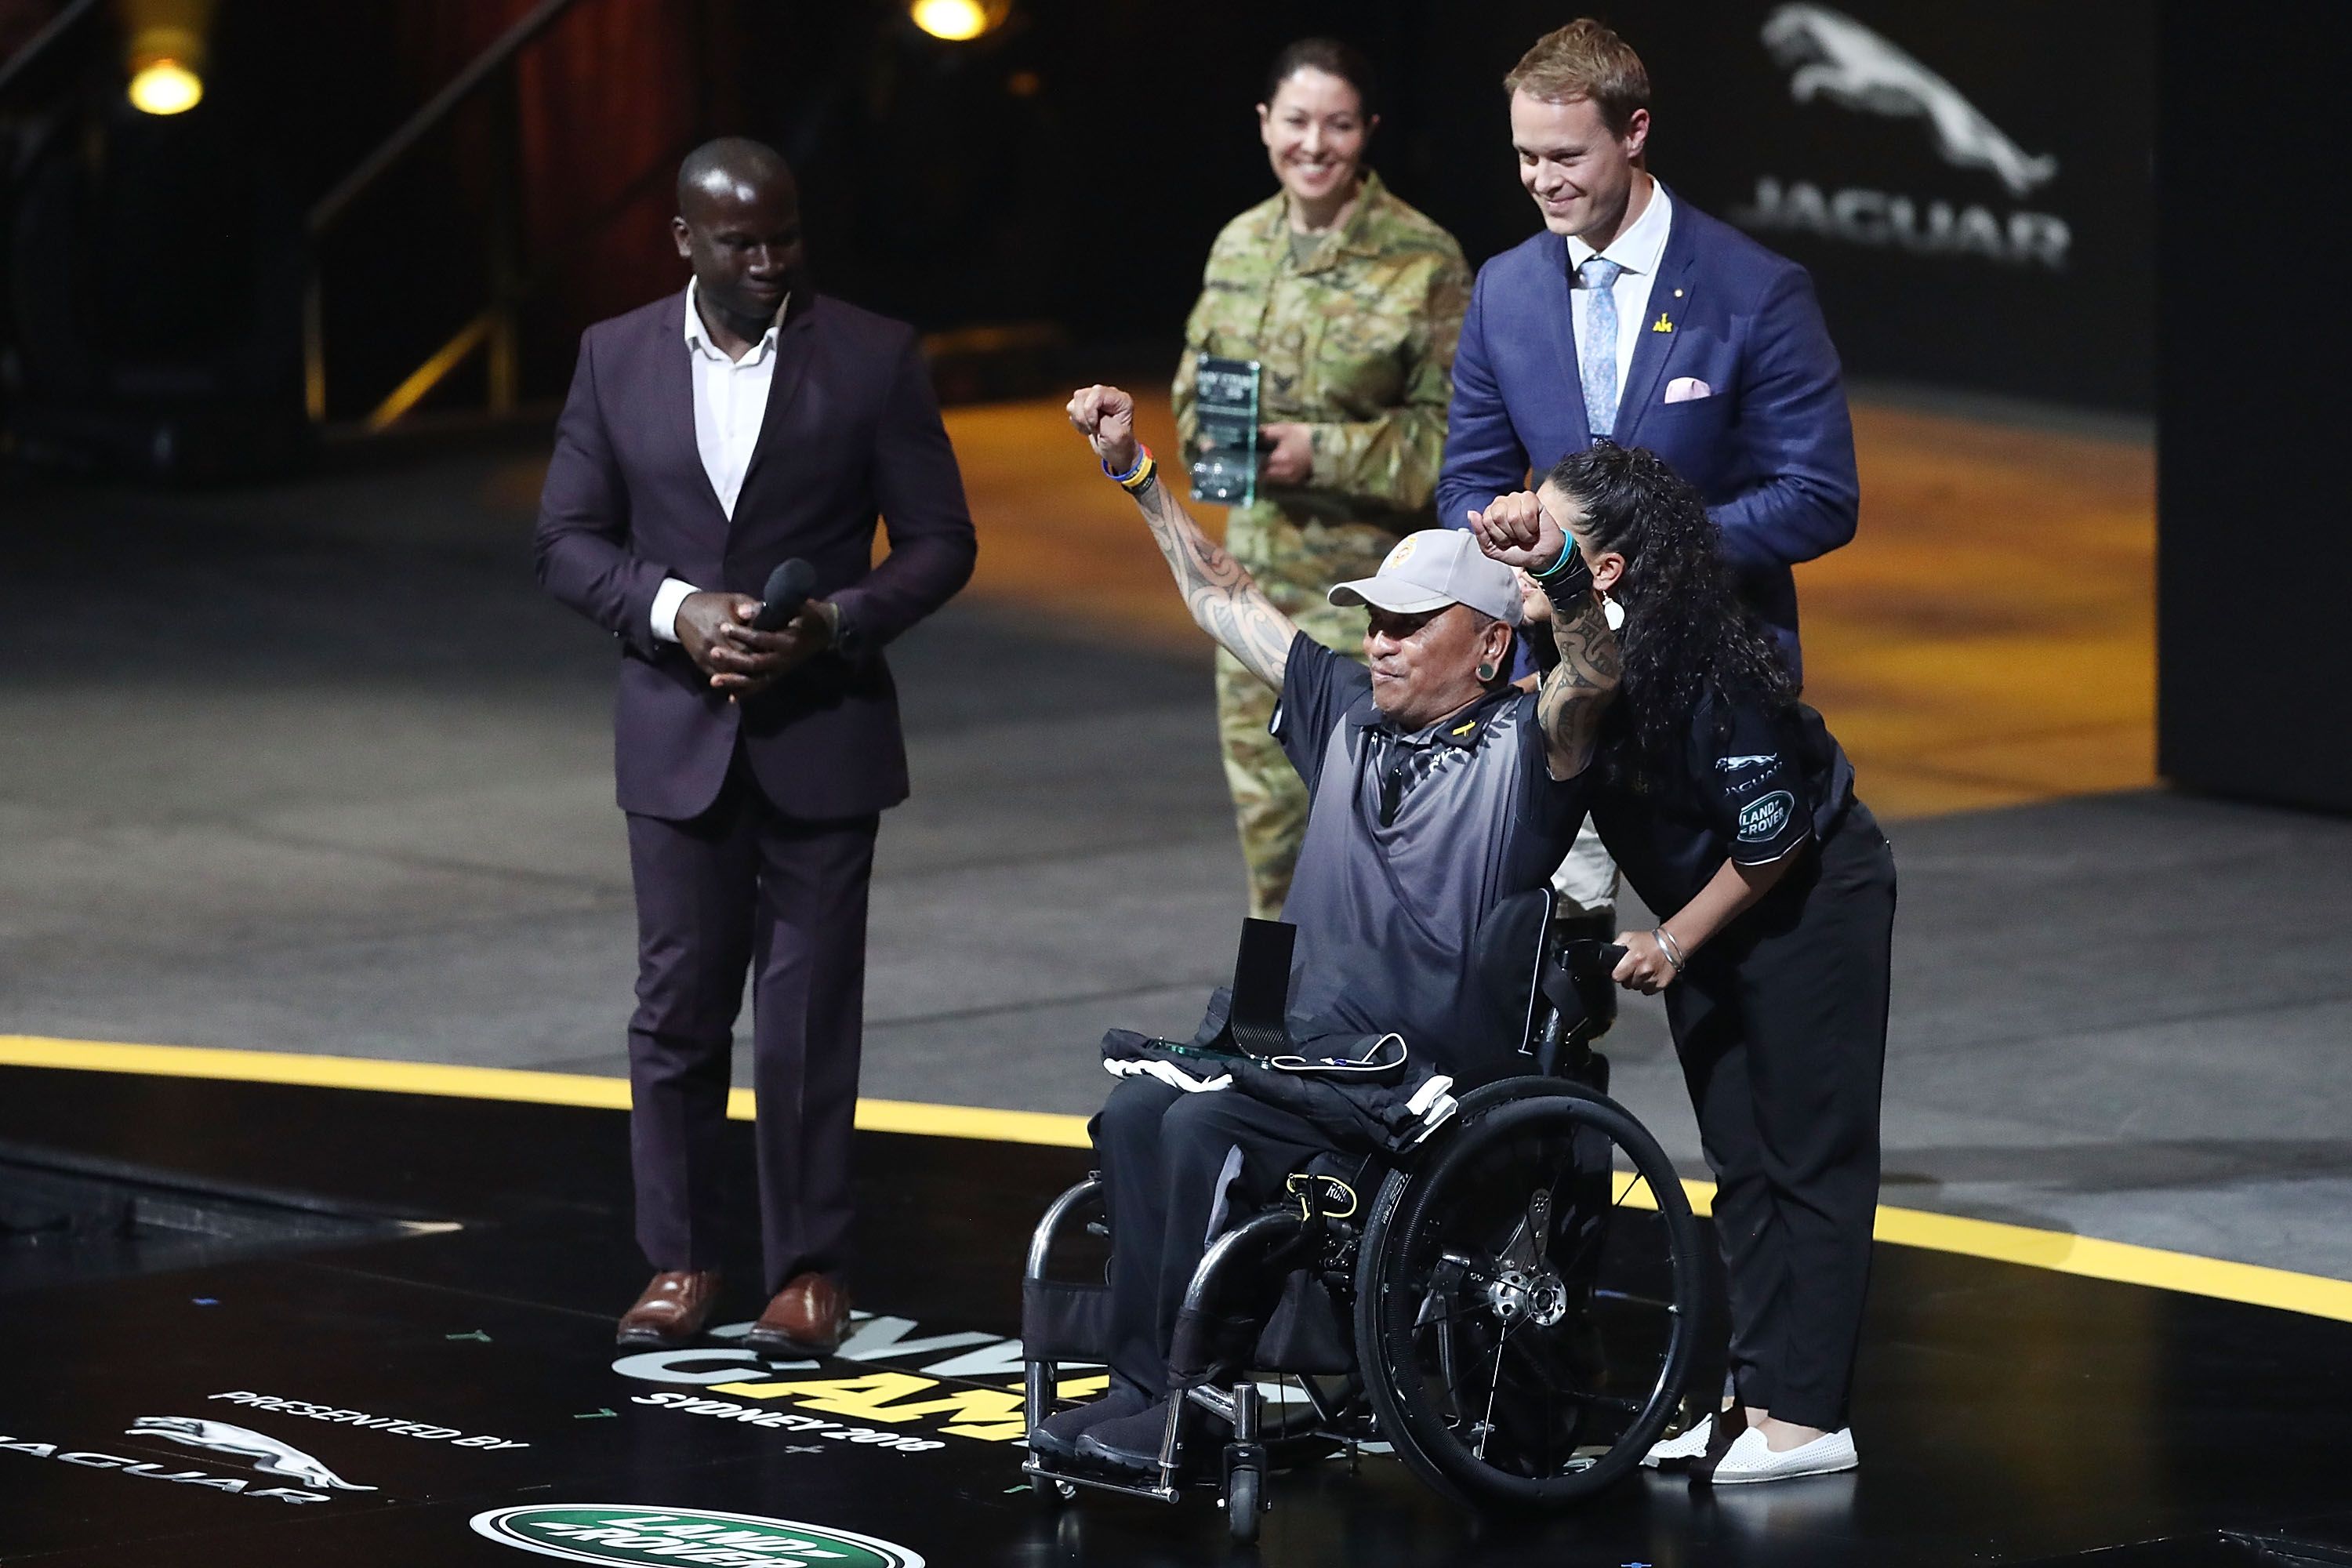 INVICTUS GAMES JAGUAR AWARD FOR EXCEPTIONAL PERFORMANCE GOES TO DUO WHO  CAPTURED THE WORLD'S ATTENTION